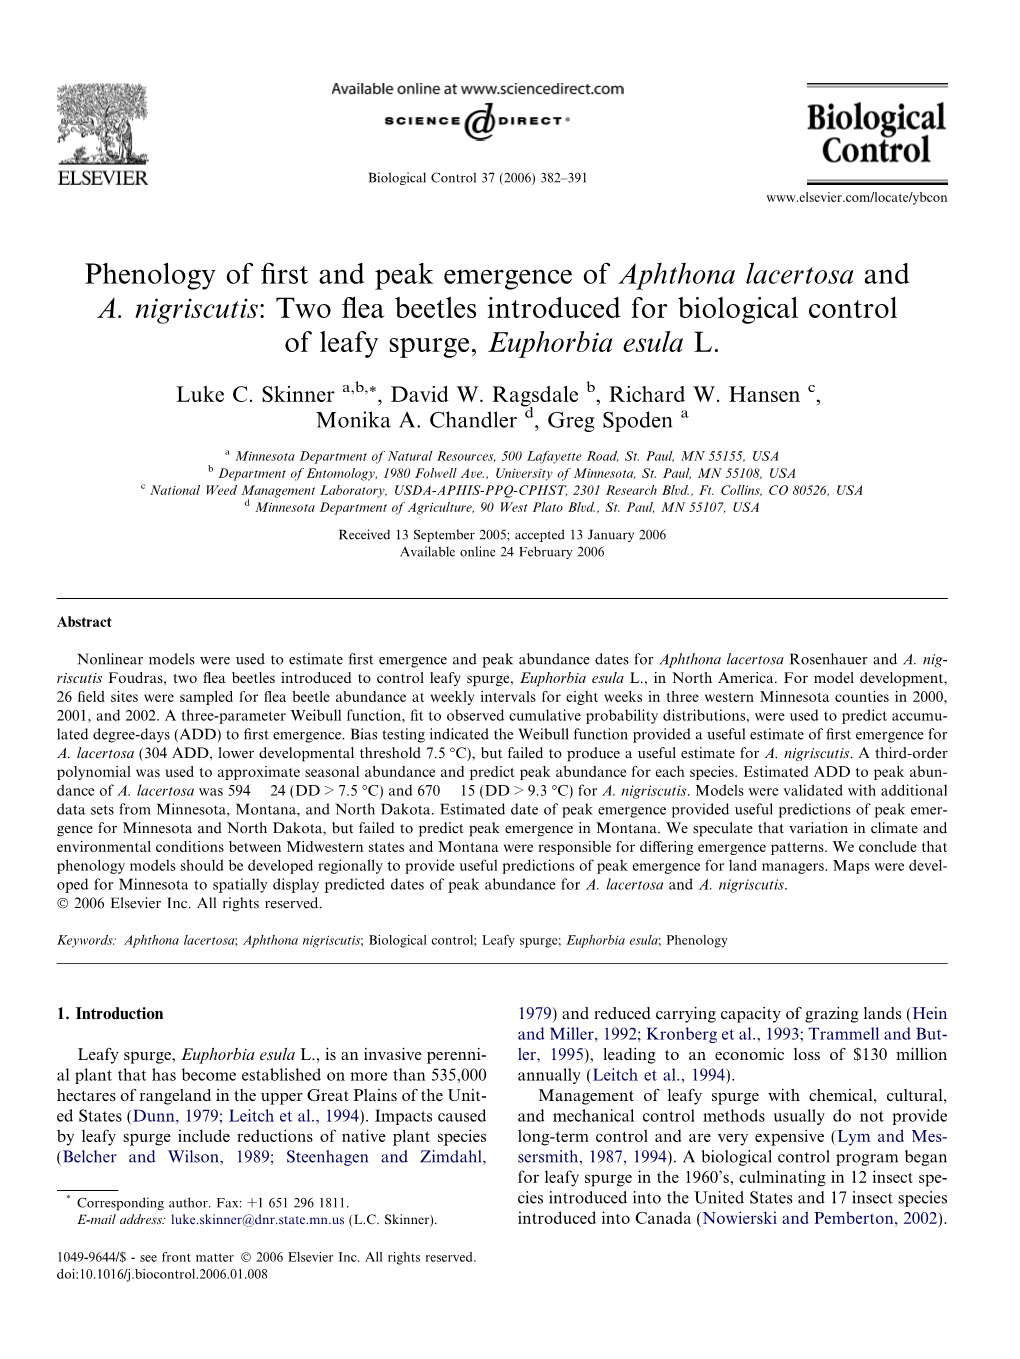 Phenology of First and Peak Emergence of Aphthona Lacertosa